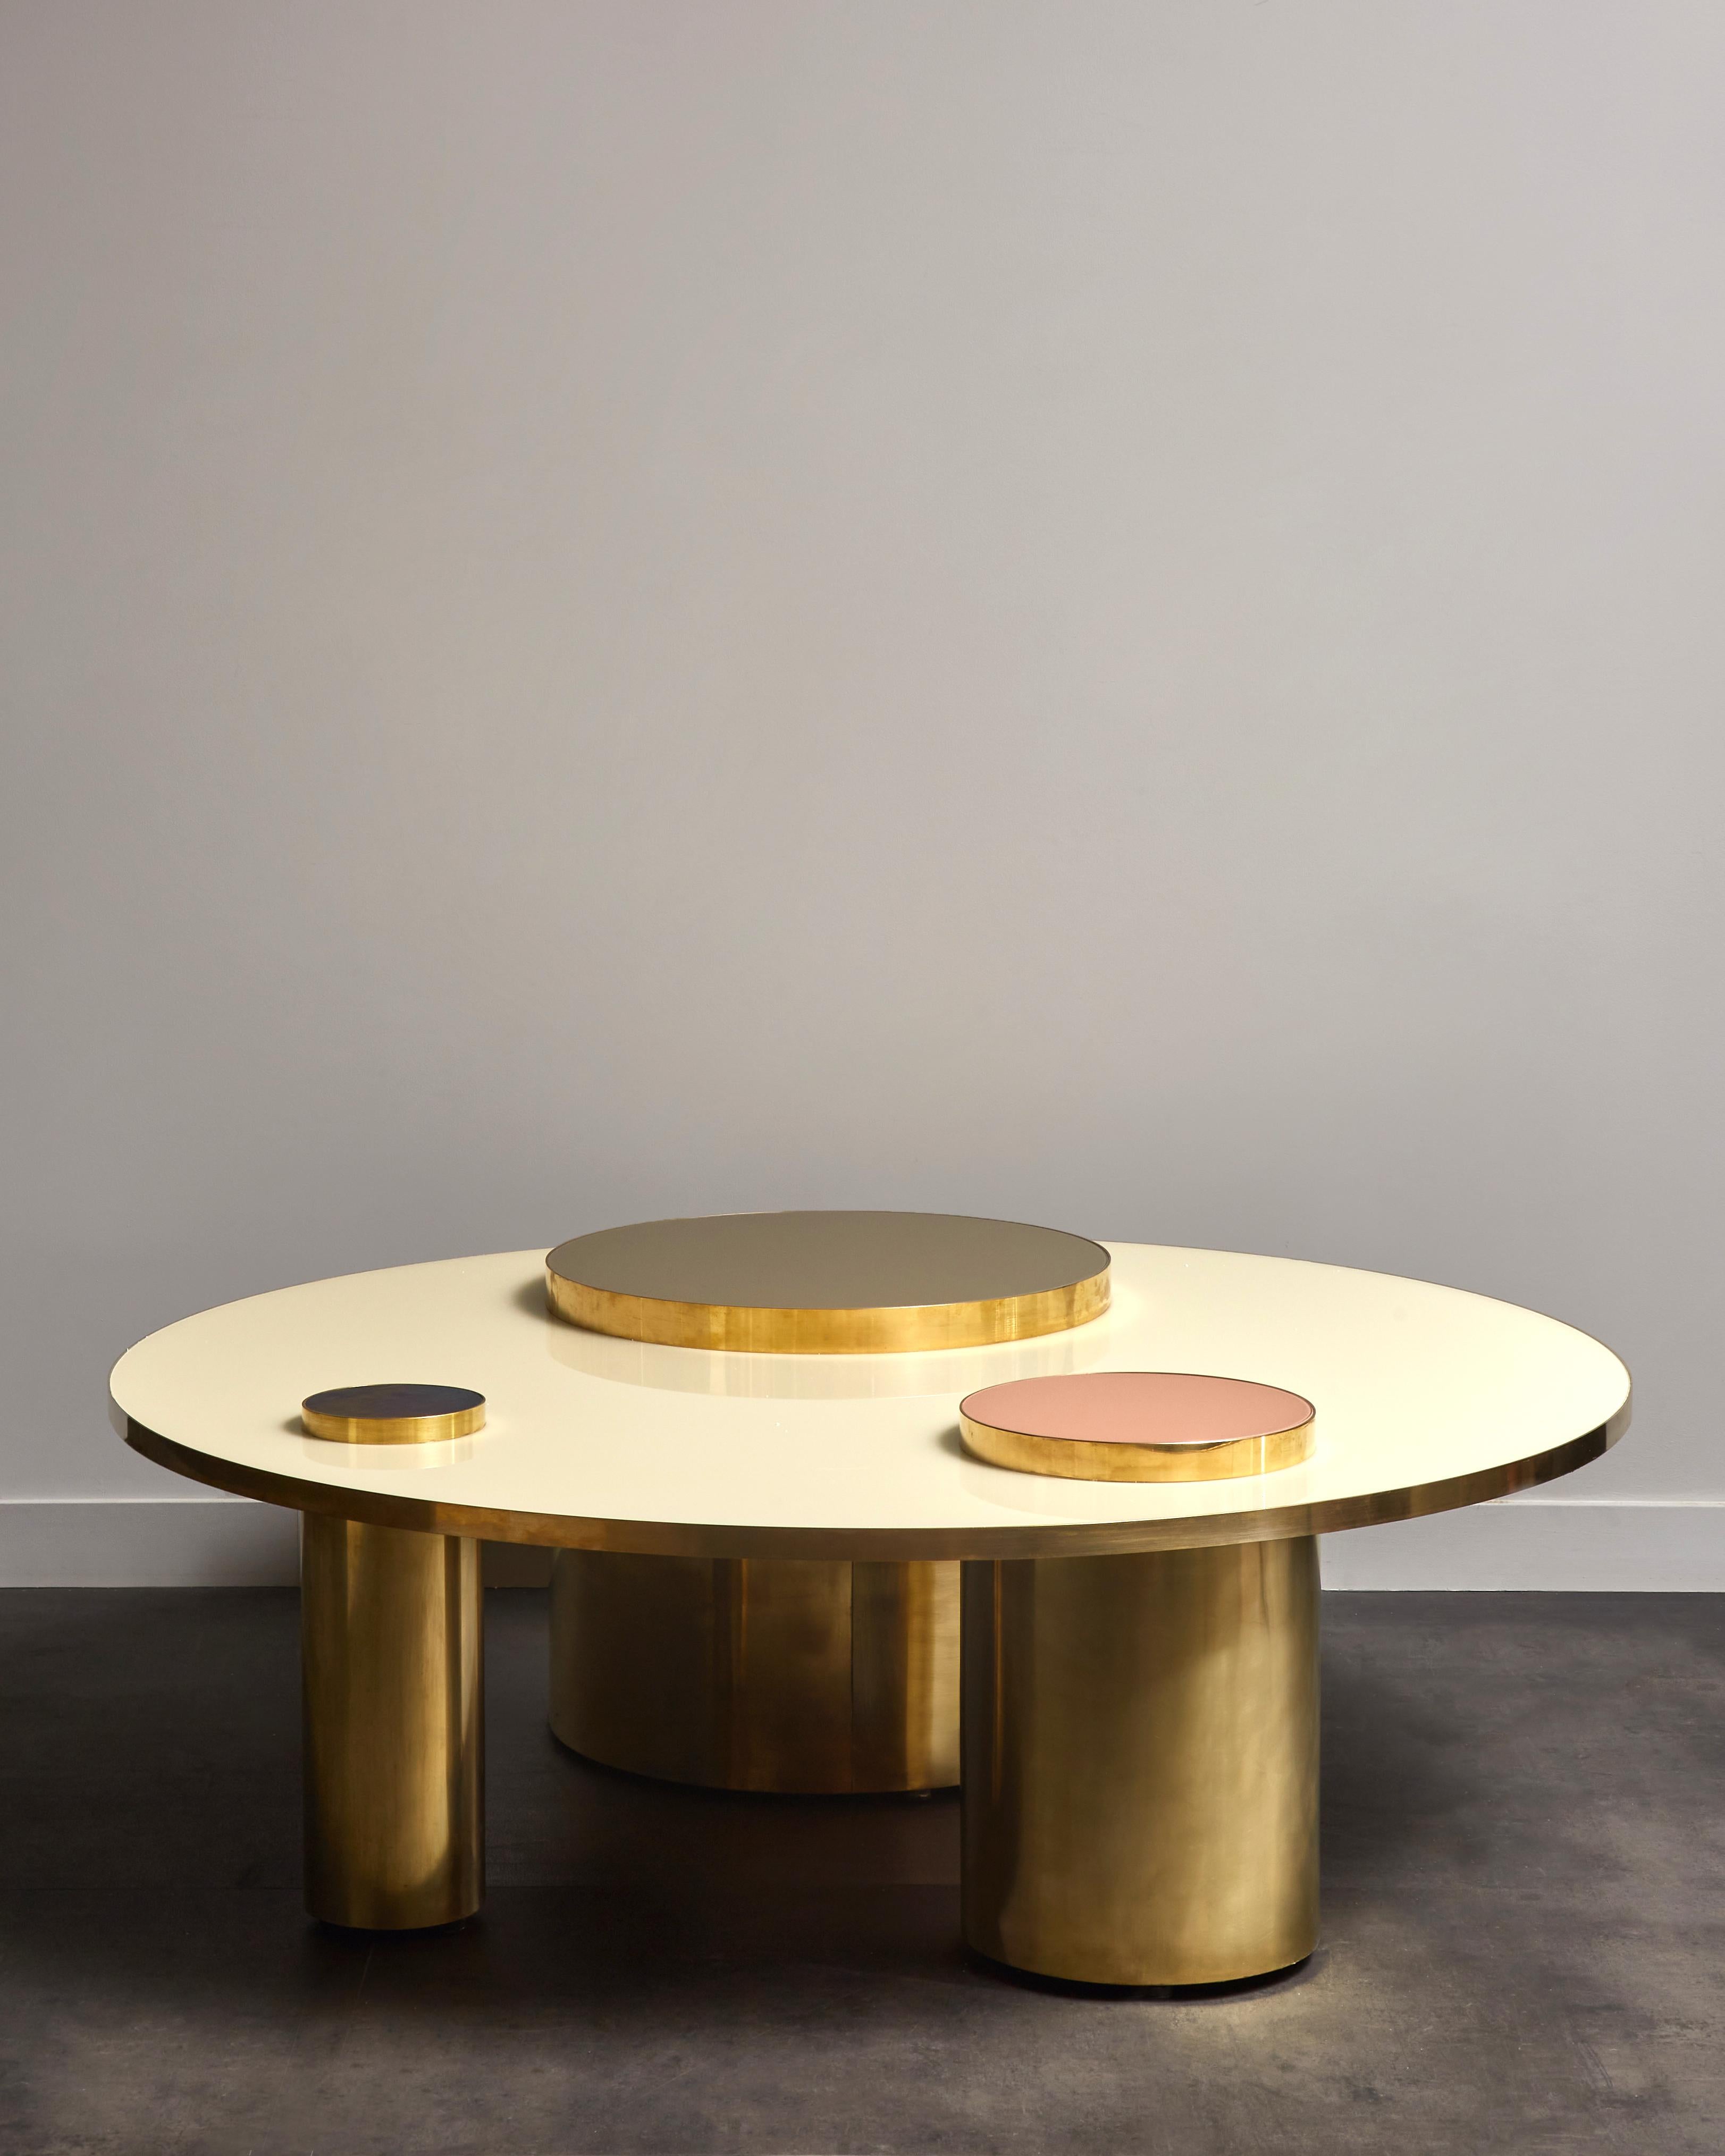 Superb coffee table in wood and brass, with tainted mirrors.
Creation by Studio Glustin.
France, 2022.